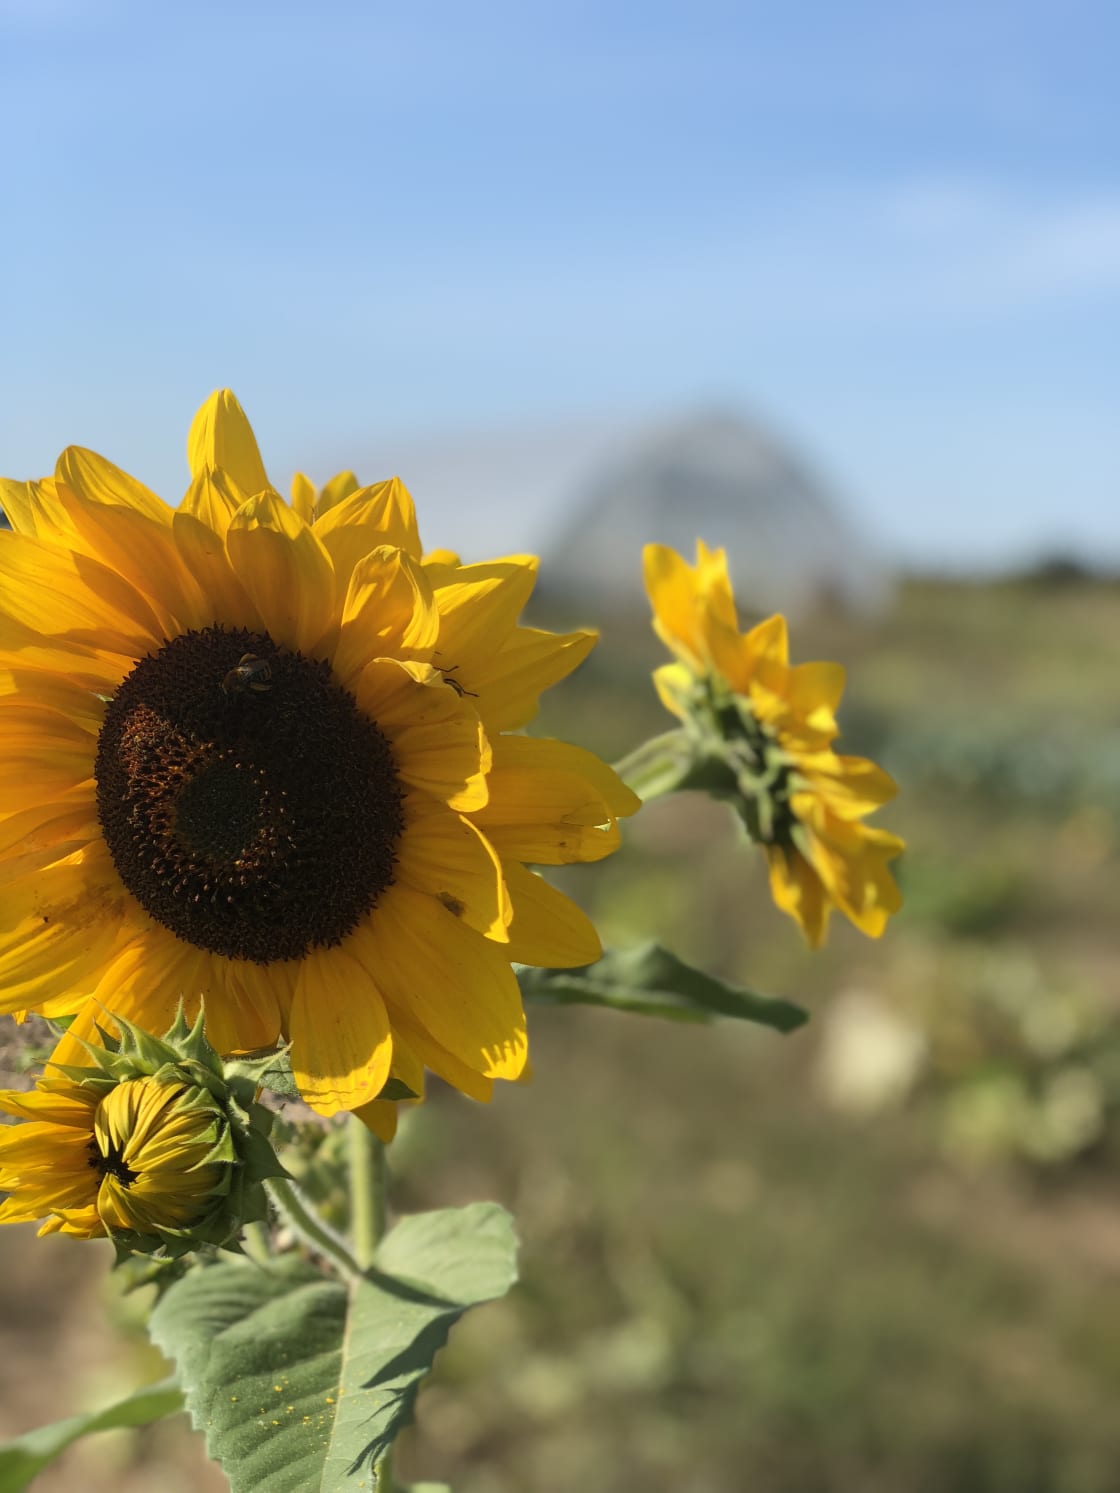 Come mid summer enjoy a walk through the pollinator habitat and enjoy the blooms of summer. Half the farm is dedicated to space for our beloved pollinators.